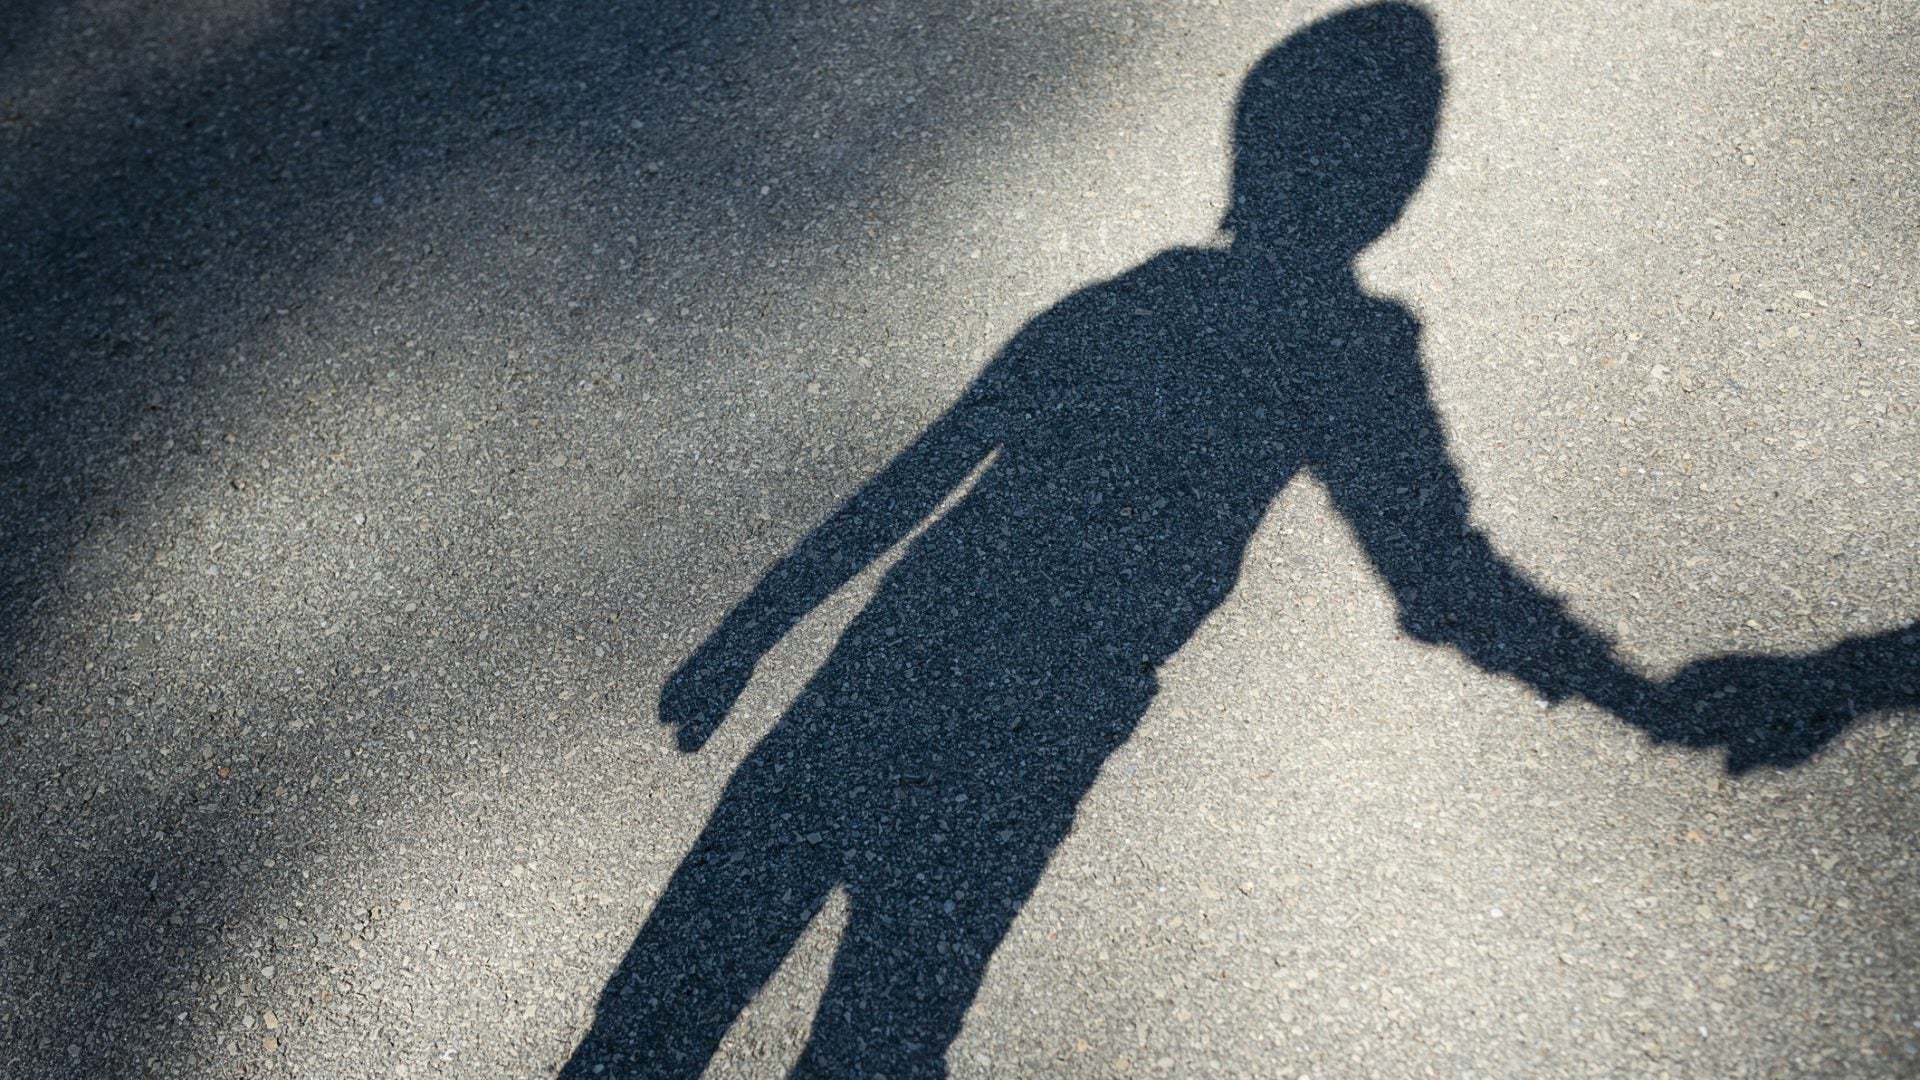 “She’s Our Hero”: Black 6-Year-Old Girl Bit Man Trying To Kidnap Her